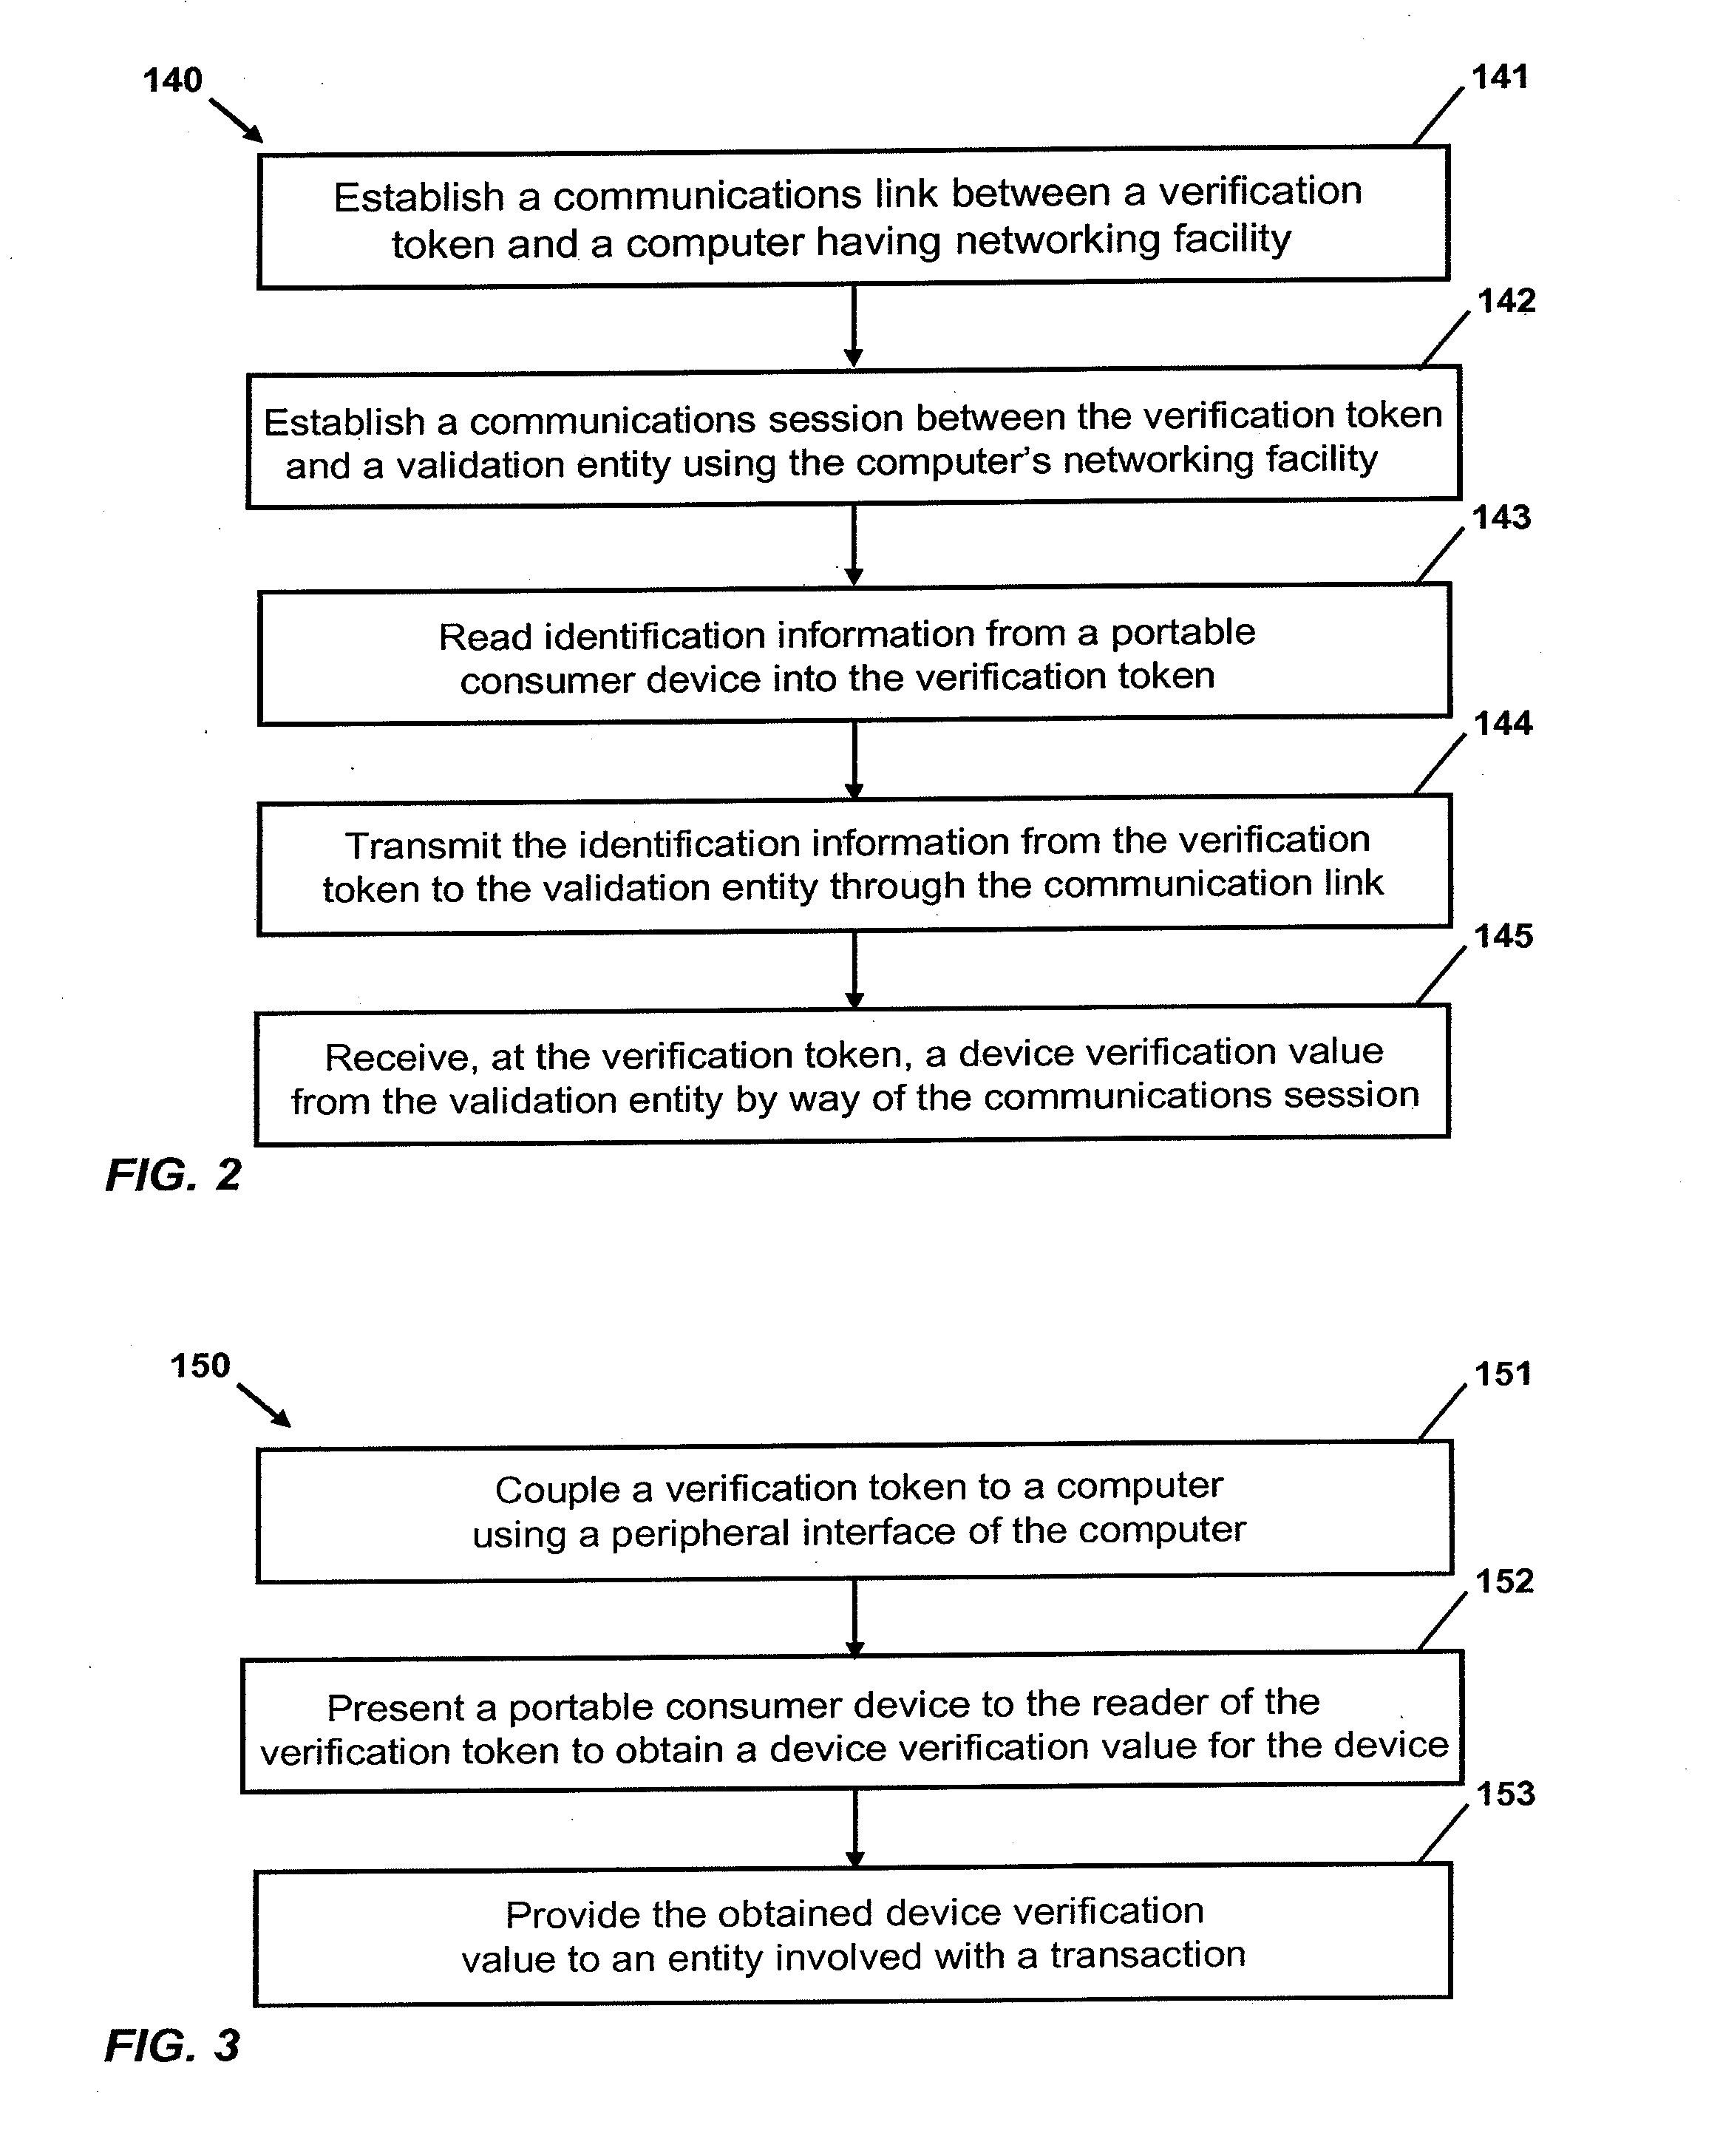 Verification of portable consumer devices